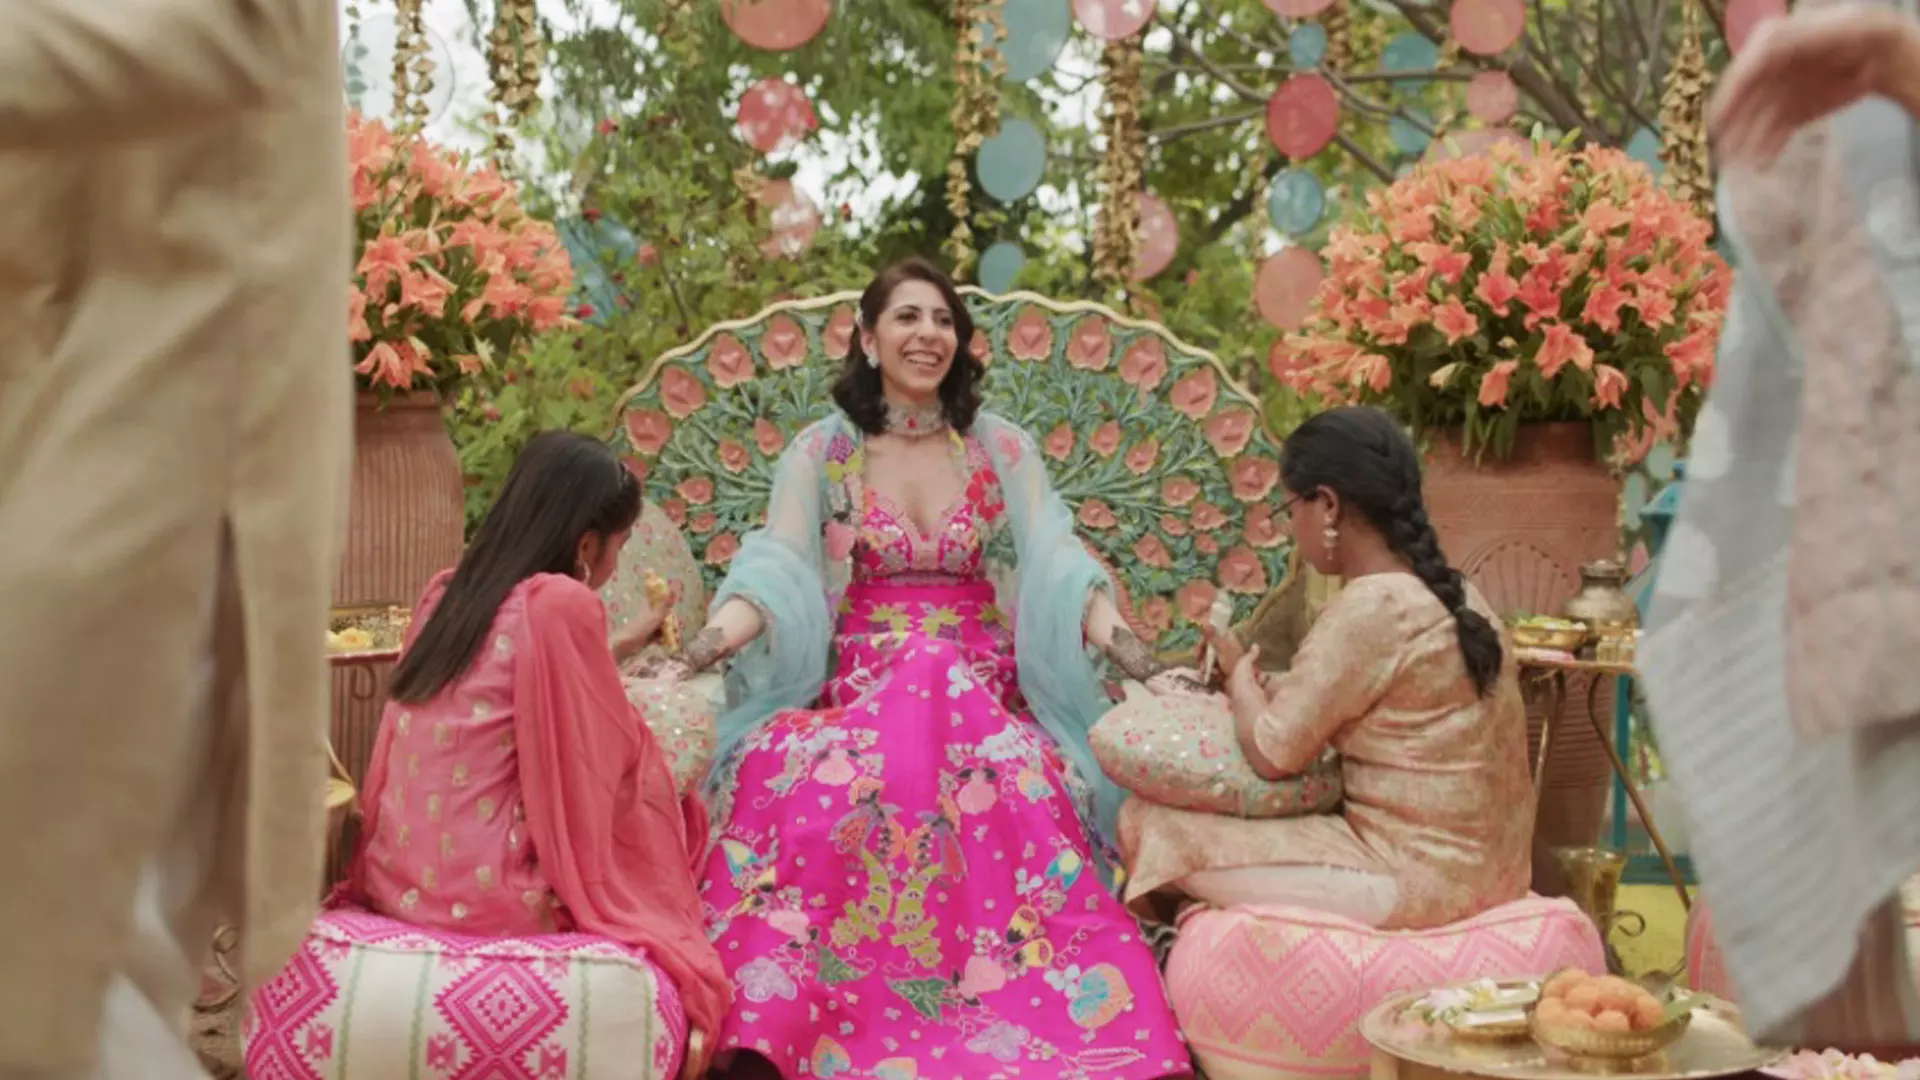 A still from Made In Heaven. Abhinav Chandran, co-founder of Meragi, a digitalised event planning platform says not everyone can afford a Made In Heaven kind of wedding so a balance has to be struck.